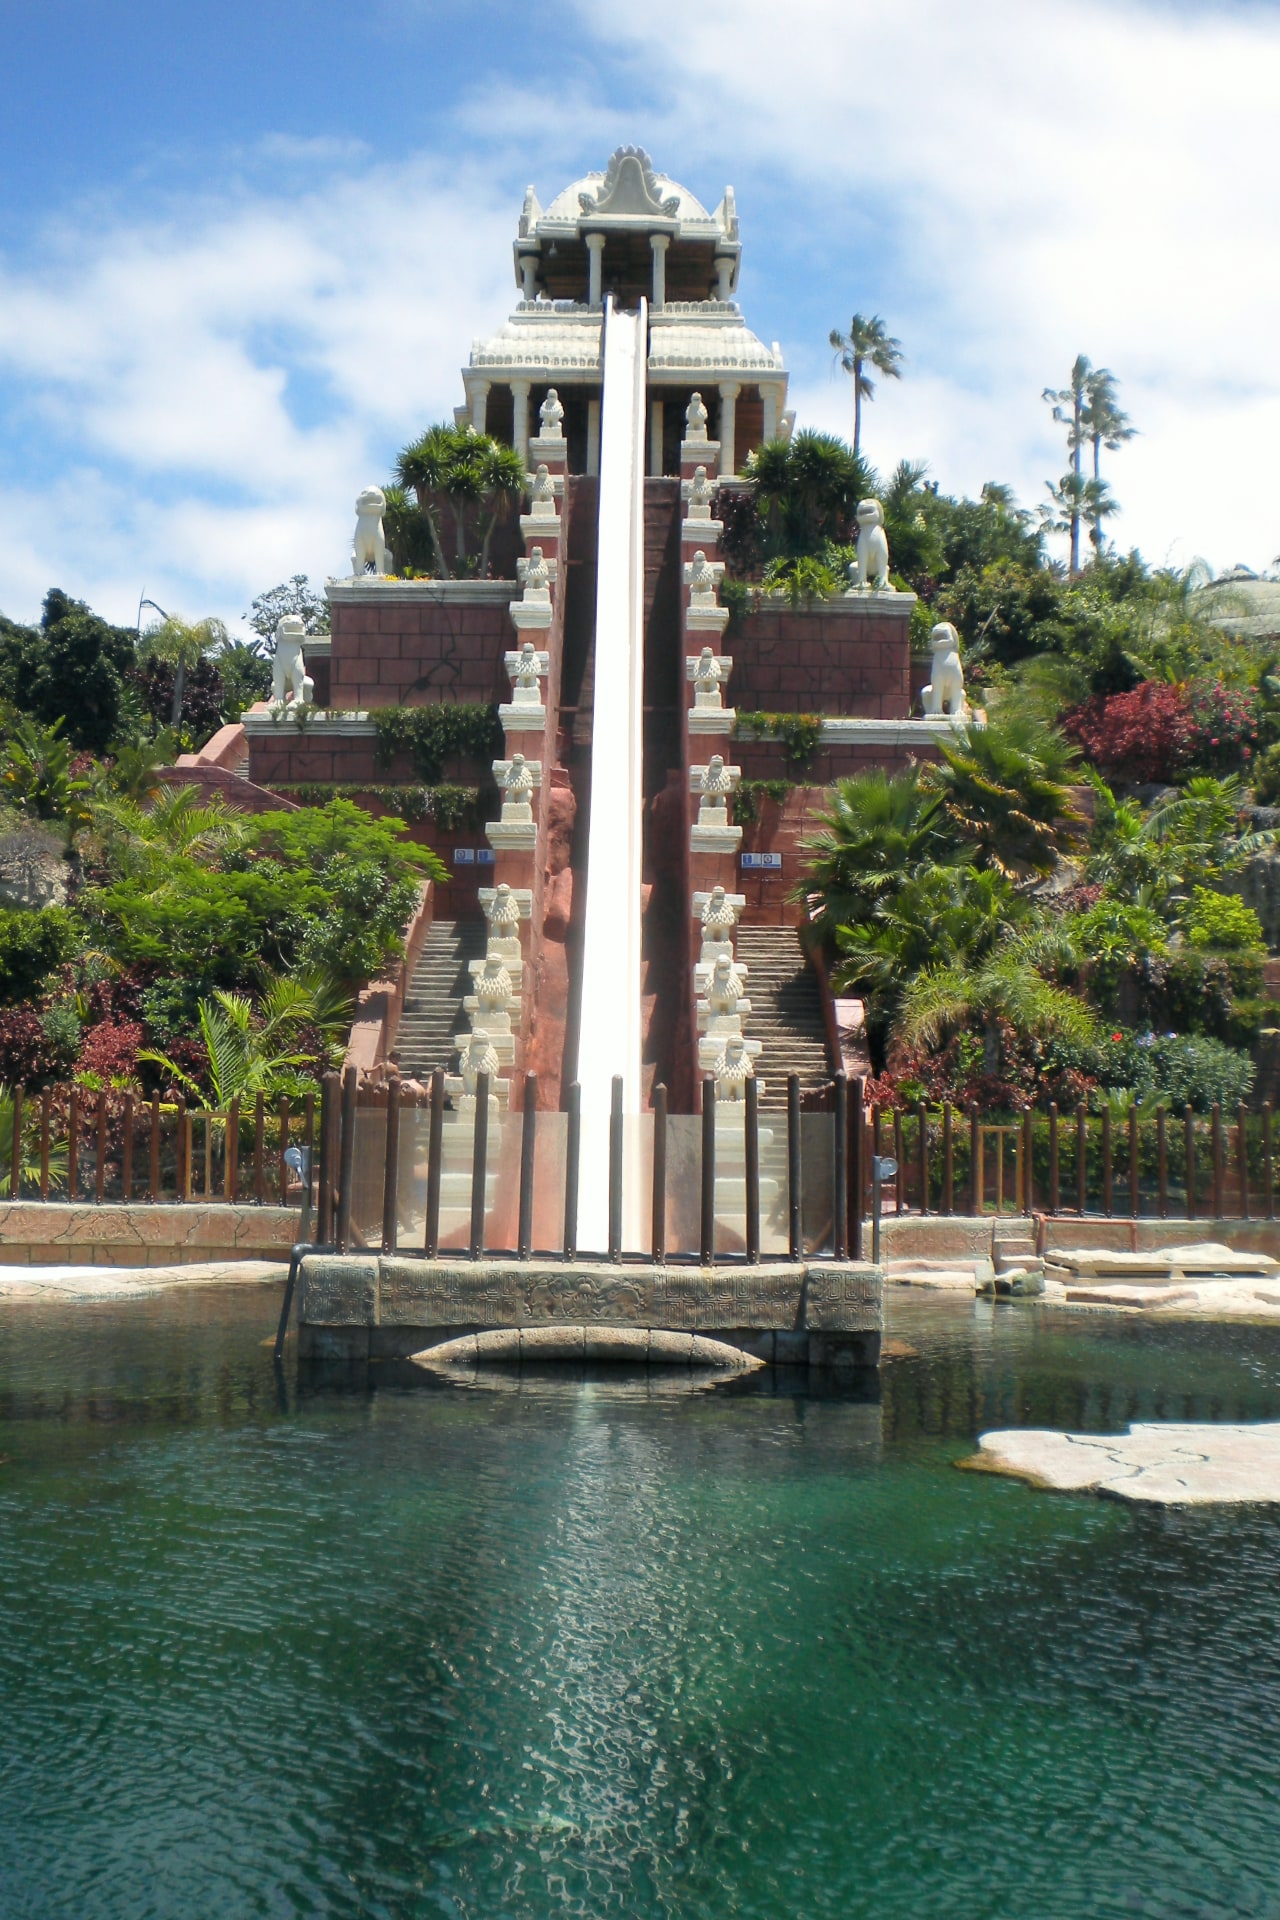 Thrilling Tower of Power water slide at Siam Park, Tenerife